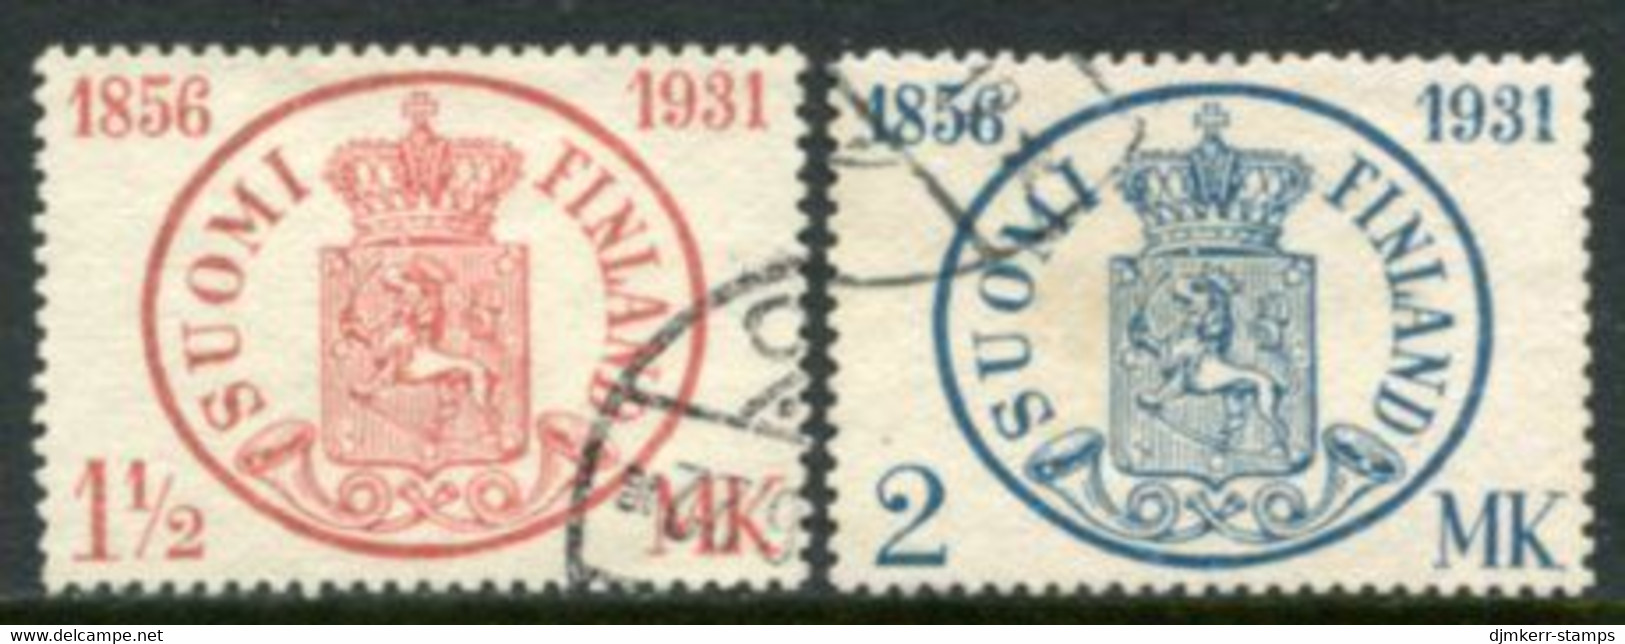 FINLAND 1931 Stamp Anniversary Used.  Michel 167-68 - Oblitérés